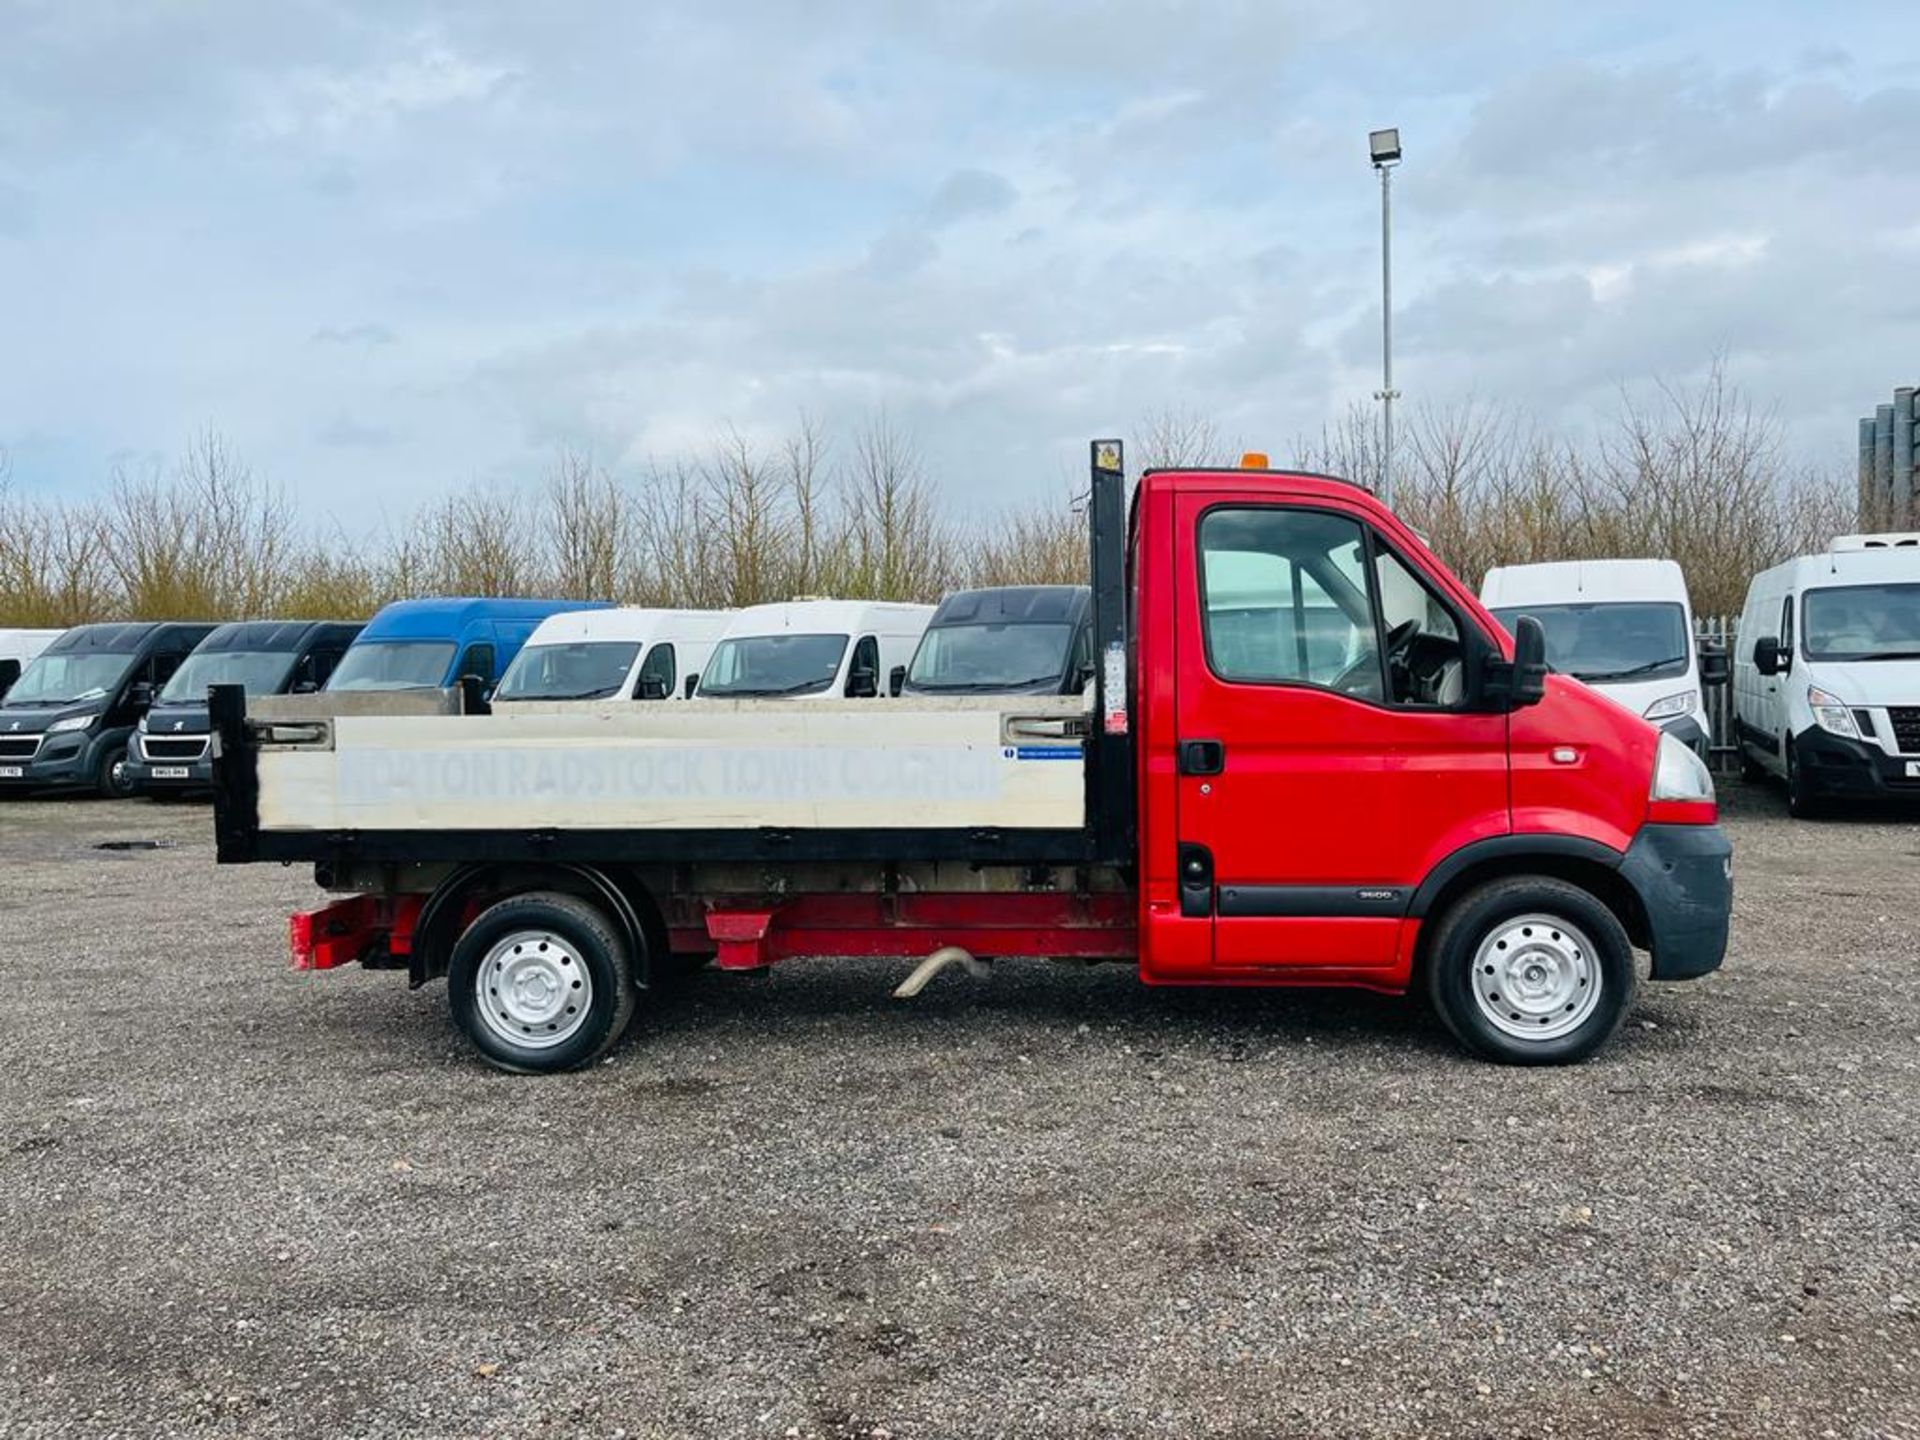 ** ON SALE ** Vauxhall Movano 2.5 CDTI 3500 L2 Tipper 2007 '56 Reg' - Only 78,295 Miles - Image 11 of 24